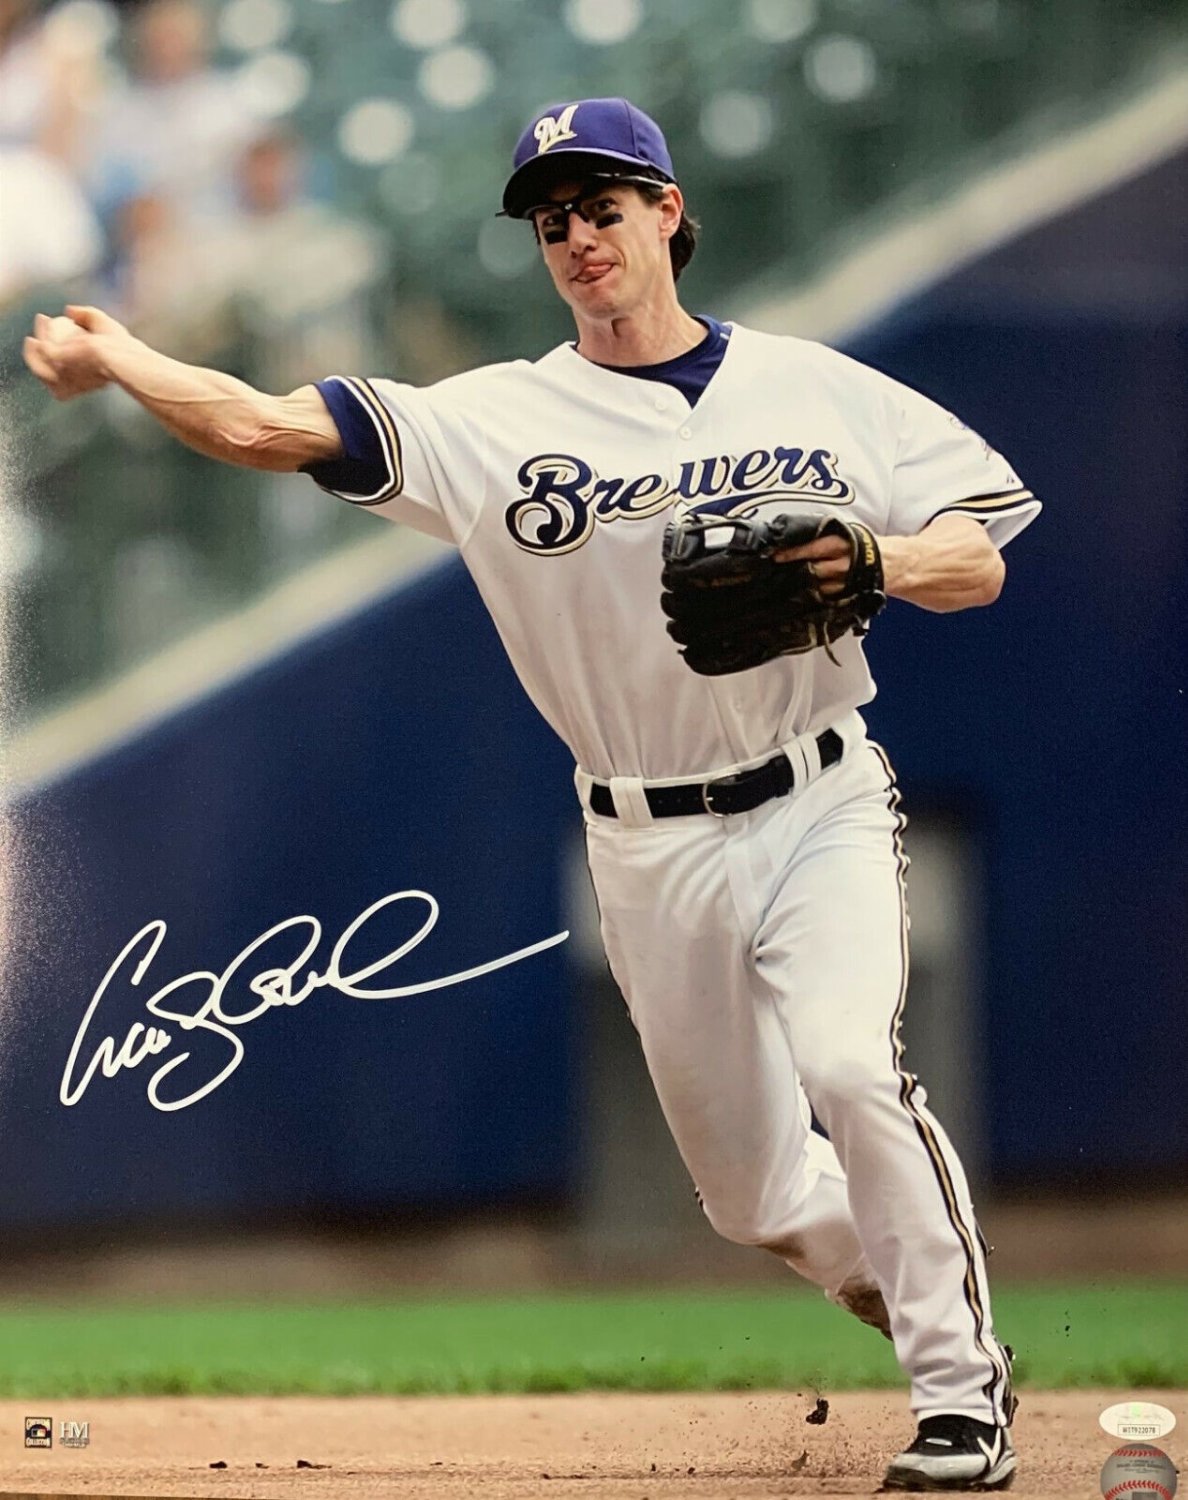 Brewers Manager CRAIG COUNSELL Signed 16x20 Photo #9 AUTO - JSA